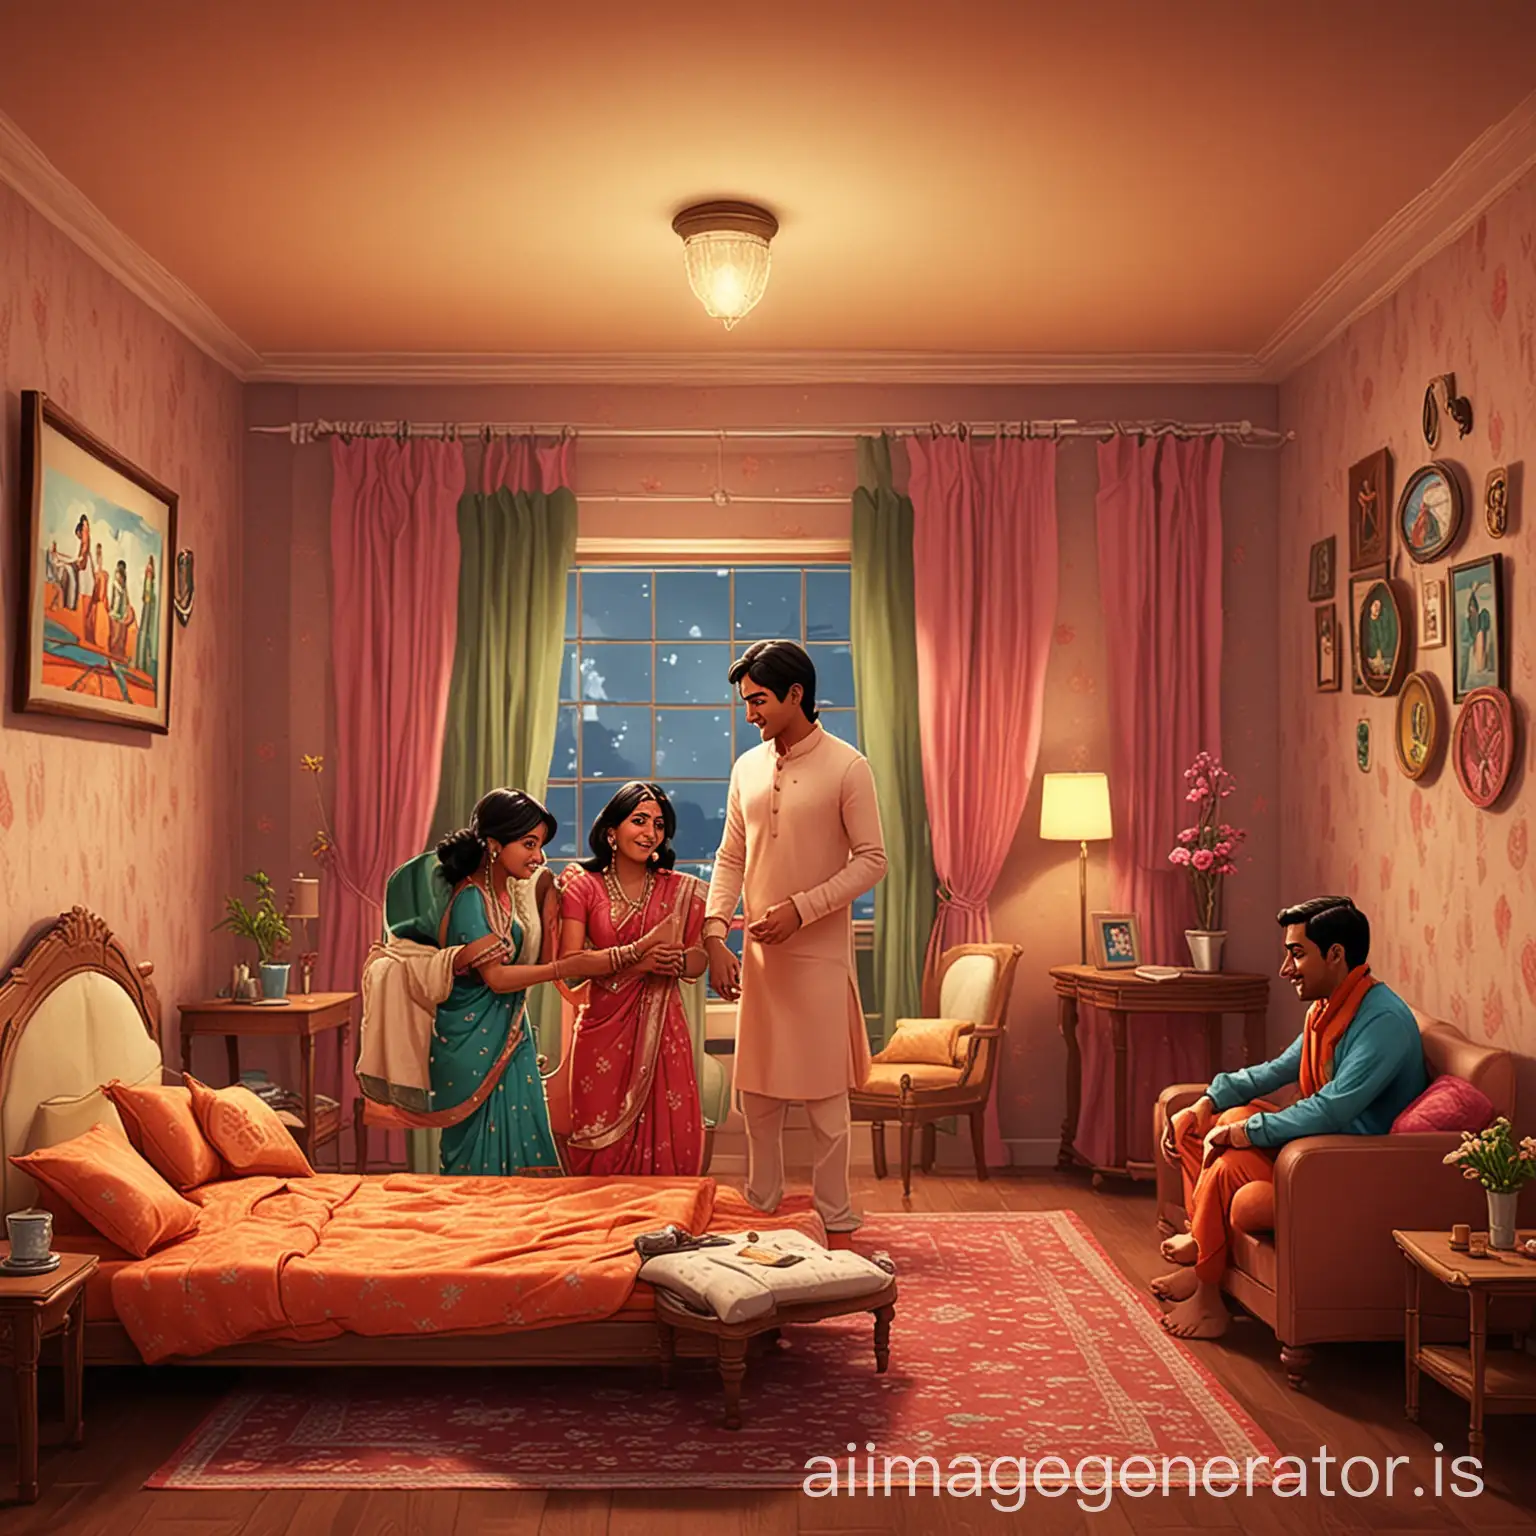 Genrate a toon image of a room where 3 indian couples are making romance sepratly